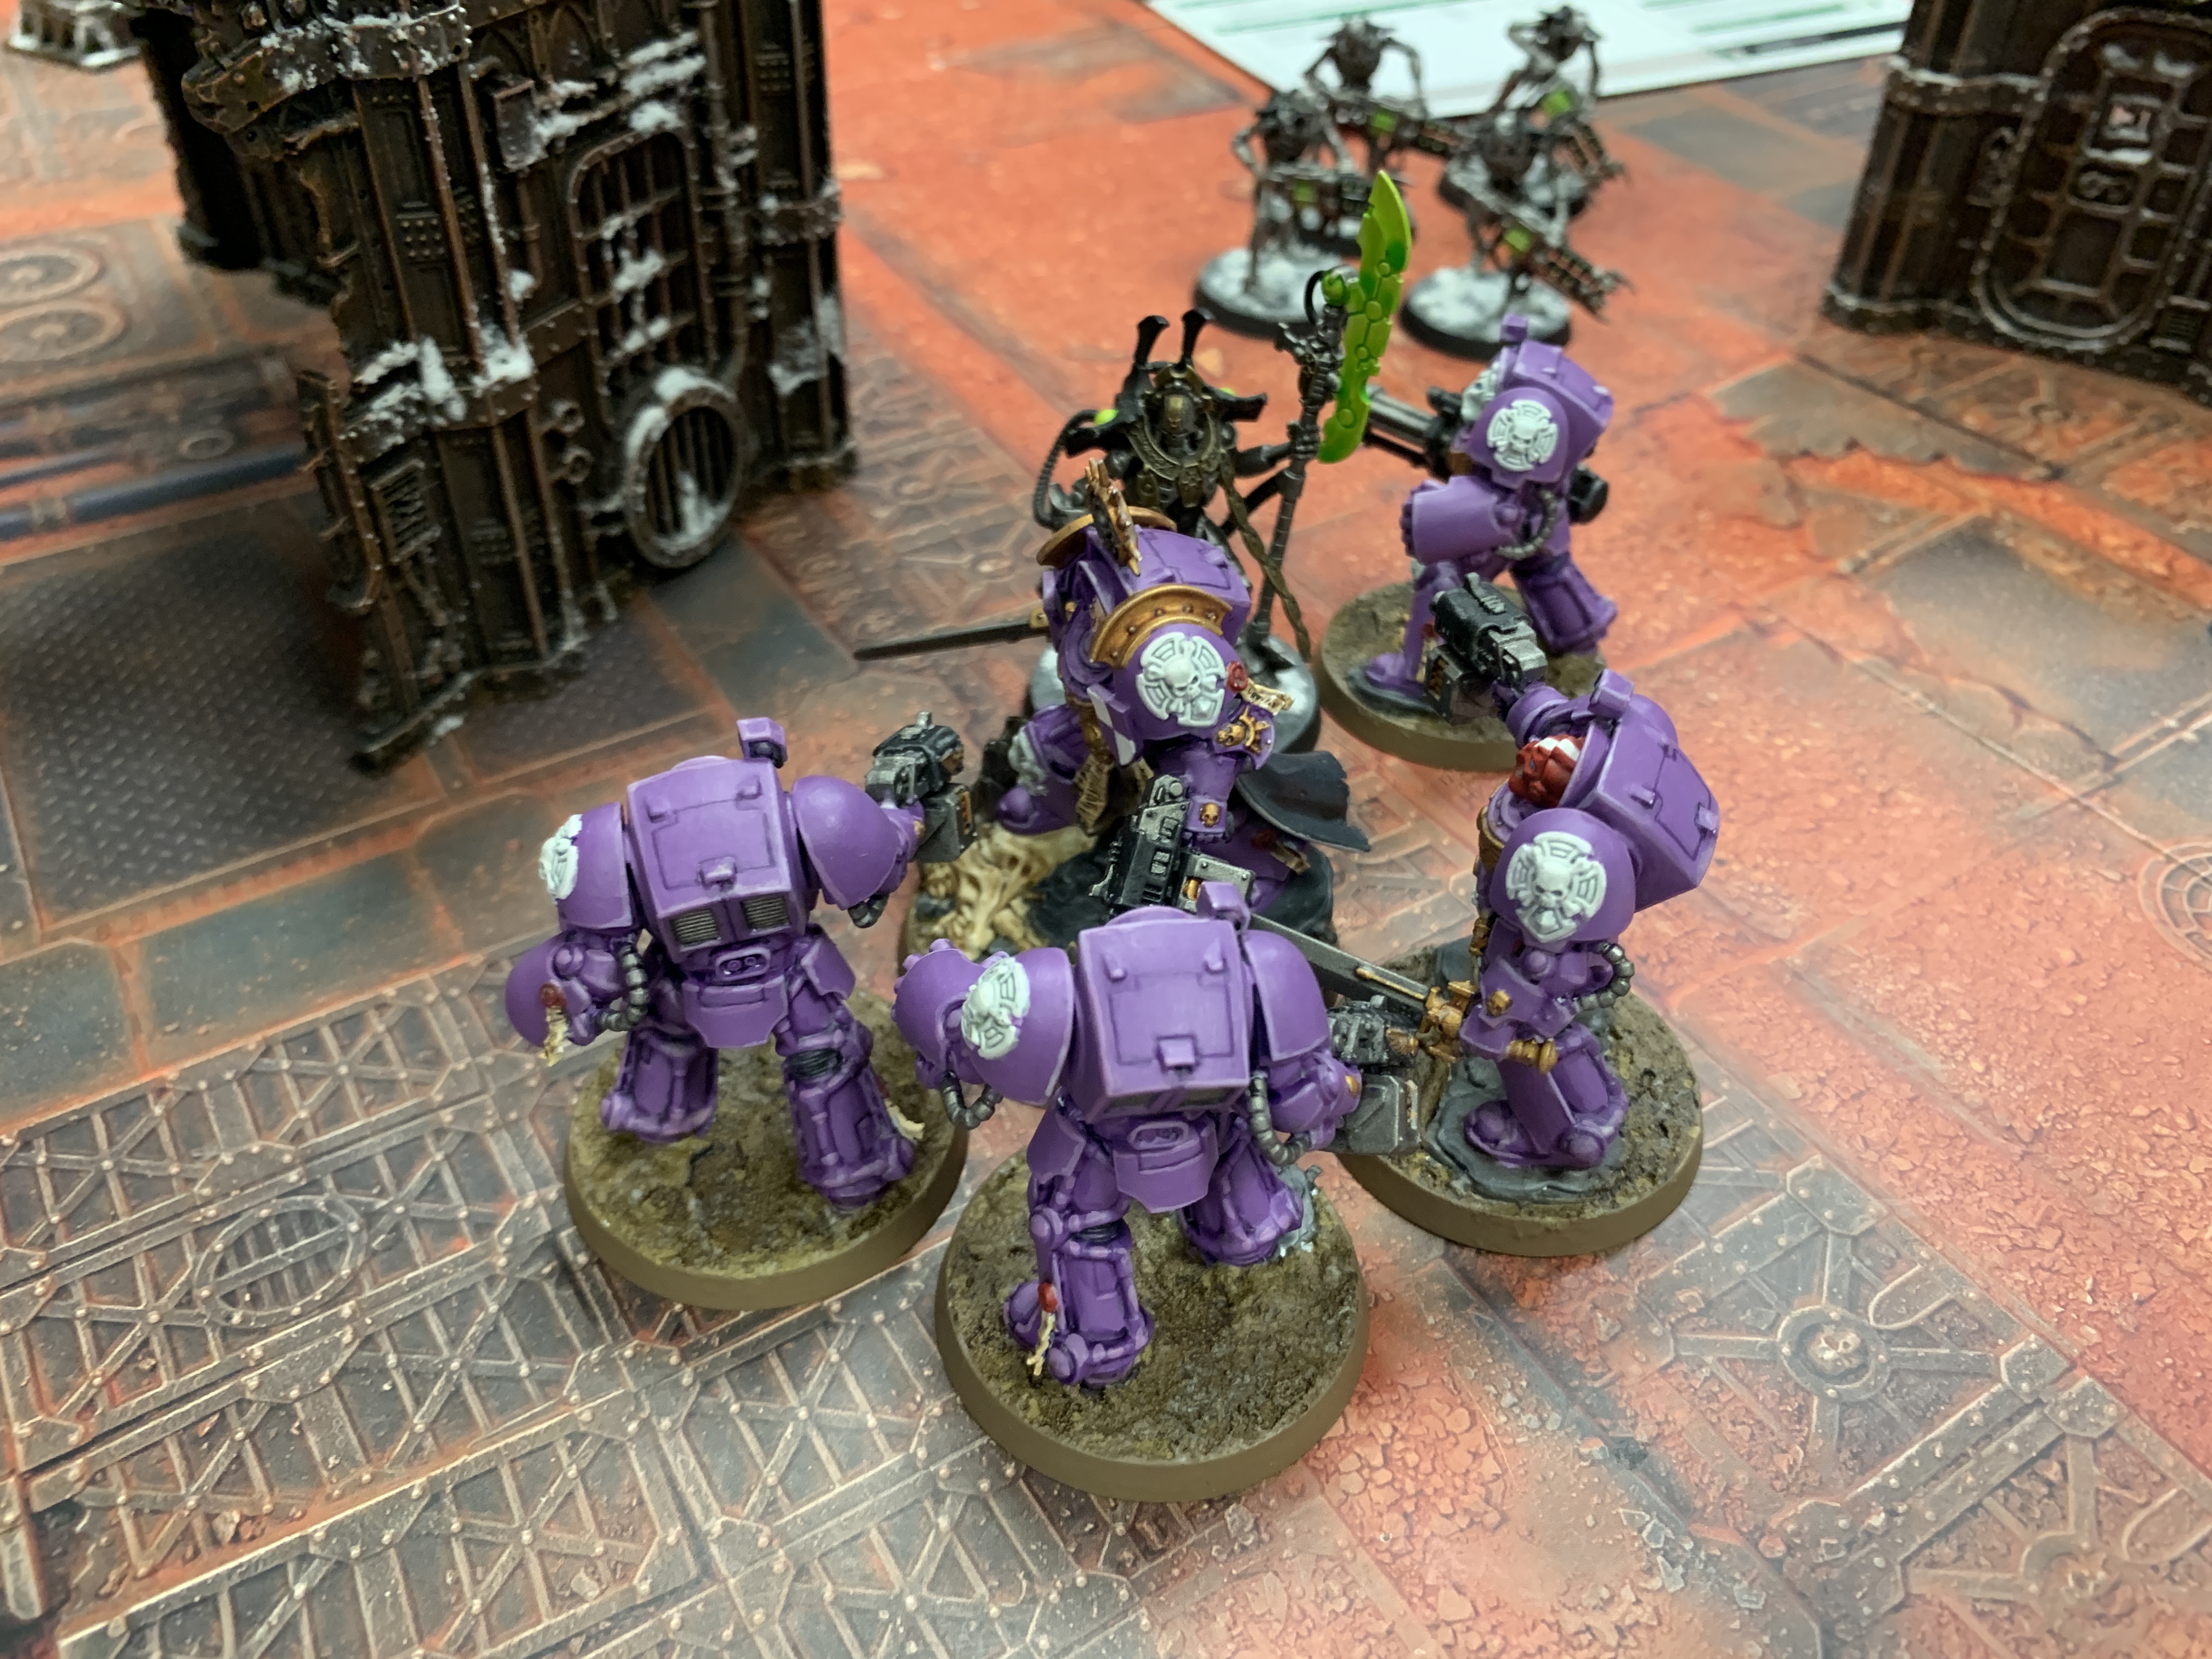 Five purple Space Marines in Terminator armour fighting a Necron Overlord with four Necron Warriors in the background